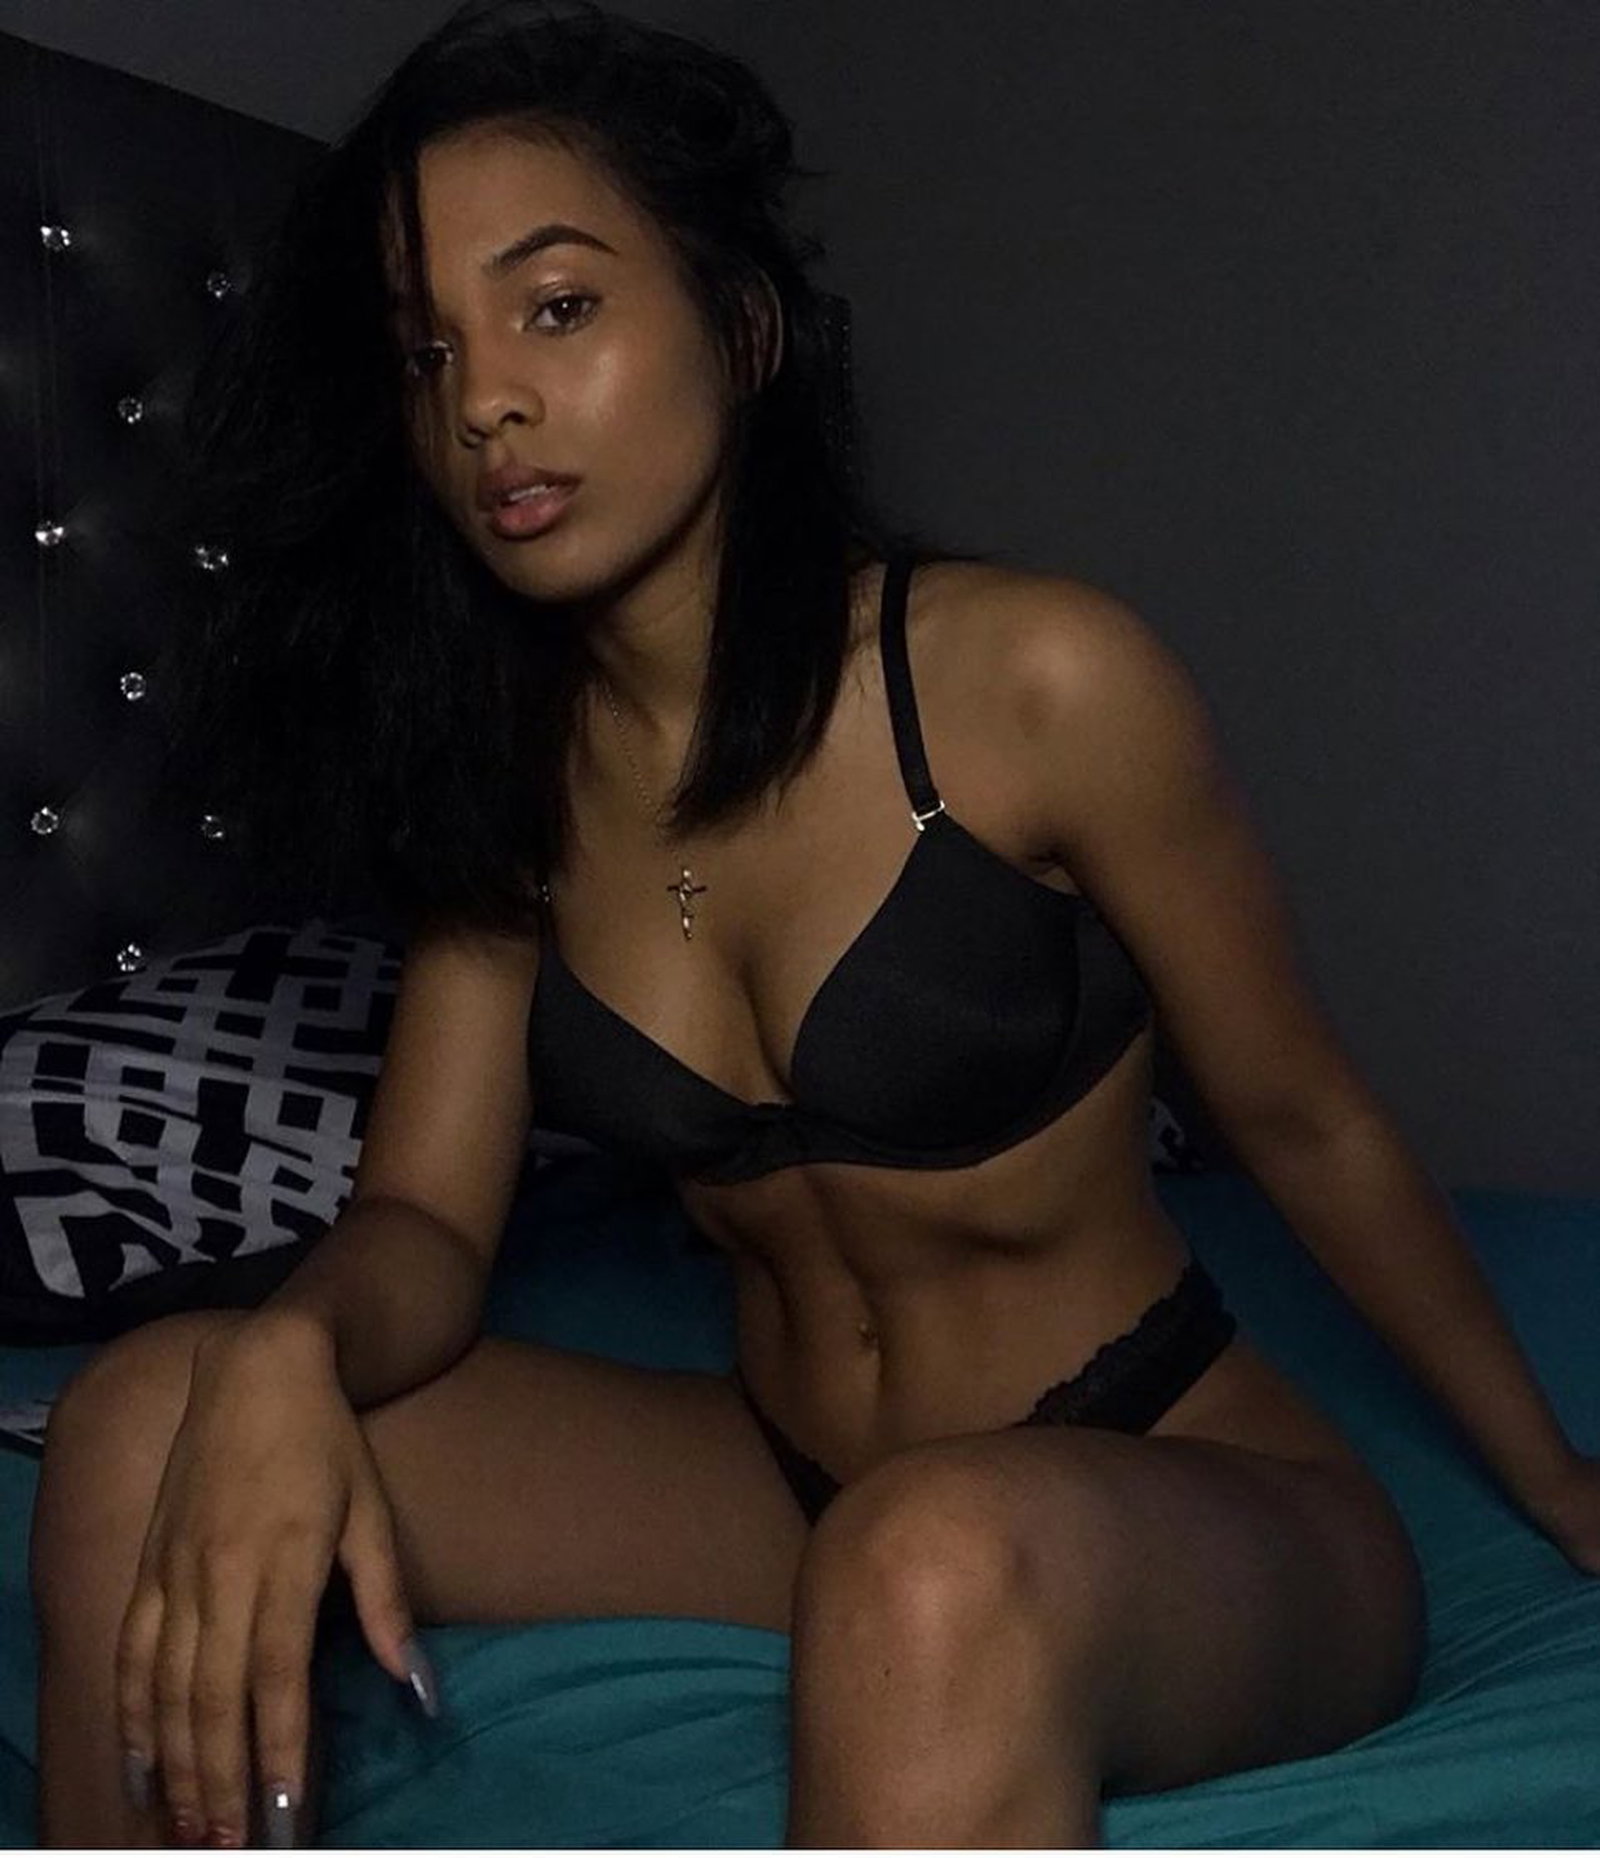 Photo by Devynsdogg with the username @Devynsdogg,  October 5, 2019 at 3:00 AM. The post is about the topic Black Beauties and the text says 'When you're out of your league, but making the most of it! #ebony #blackgirls #sexylingerie #babes #naturalgirls #smallboobs
https://www.instagram.com/p/B3Nbd01J8aN/?utm_source=ig_web_copy_link'